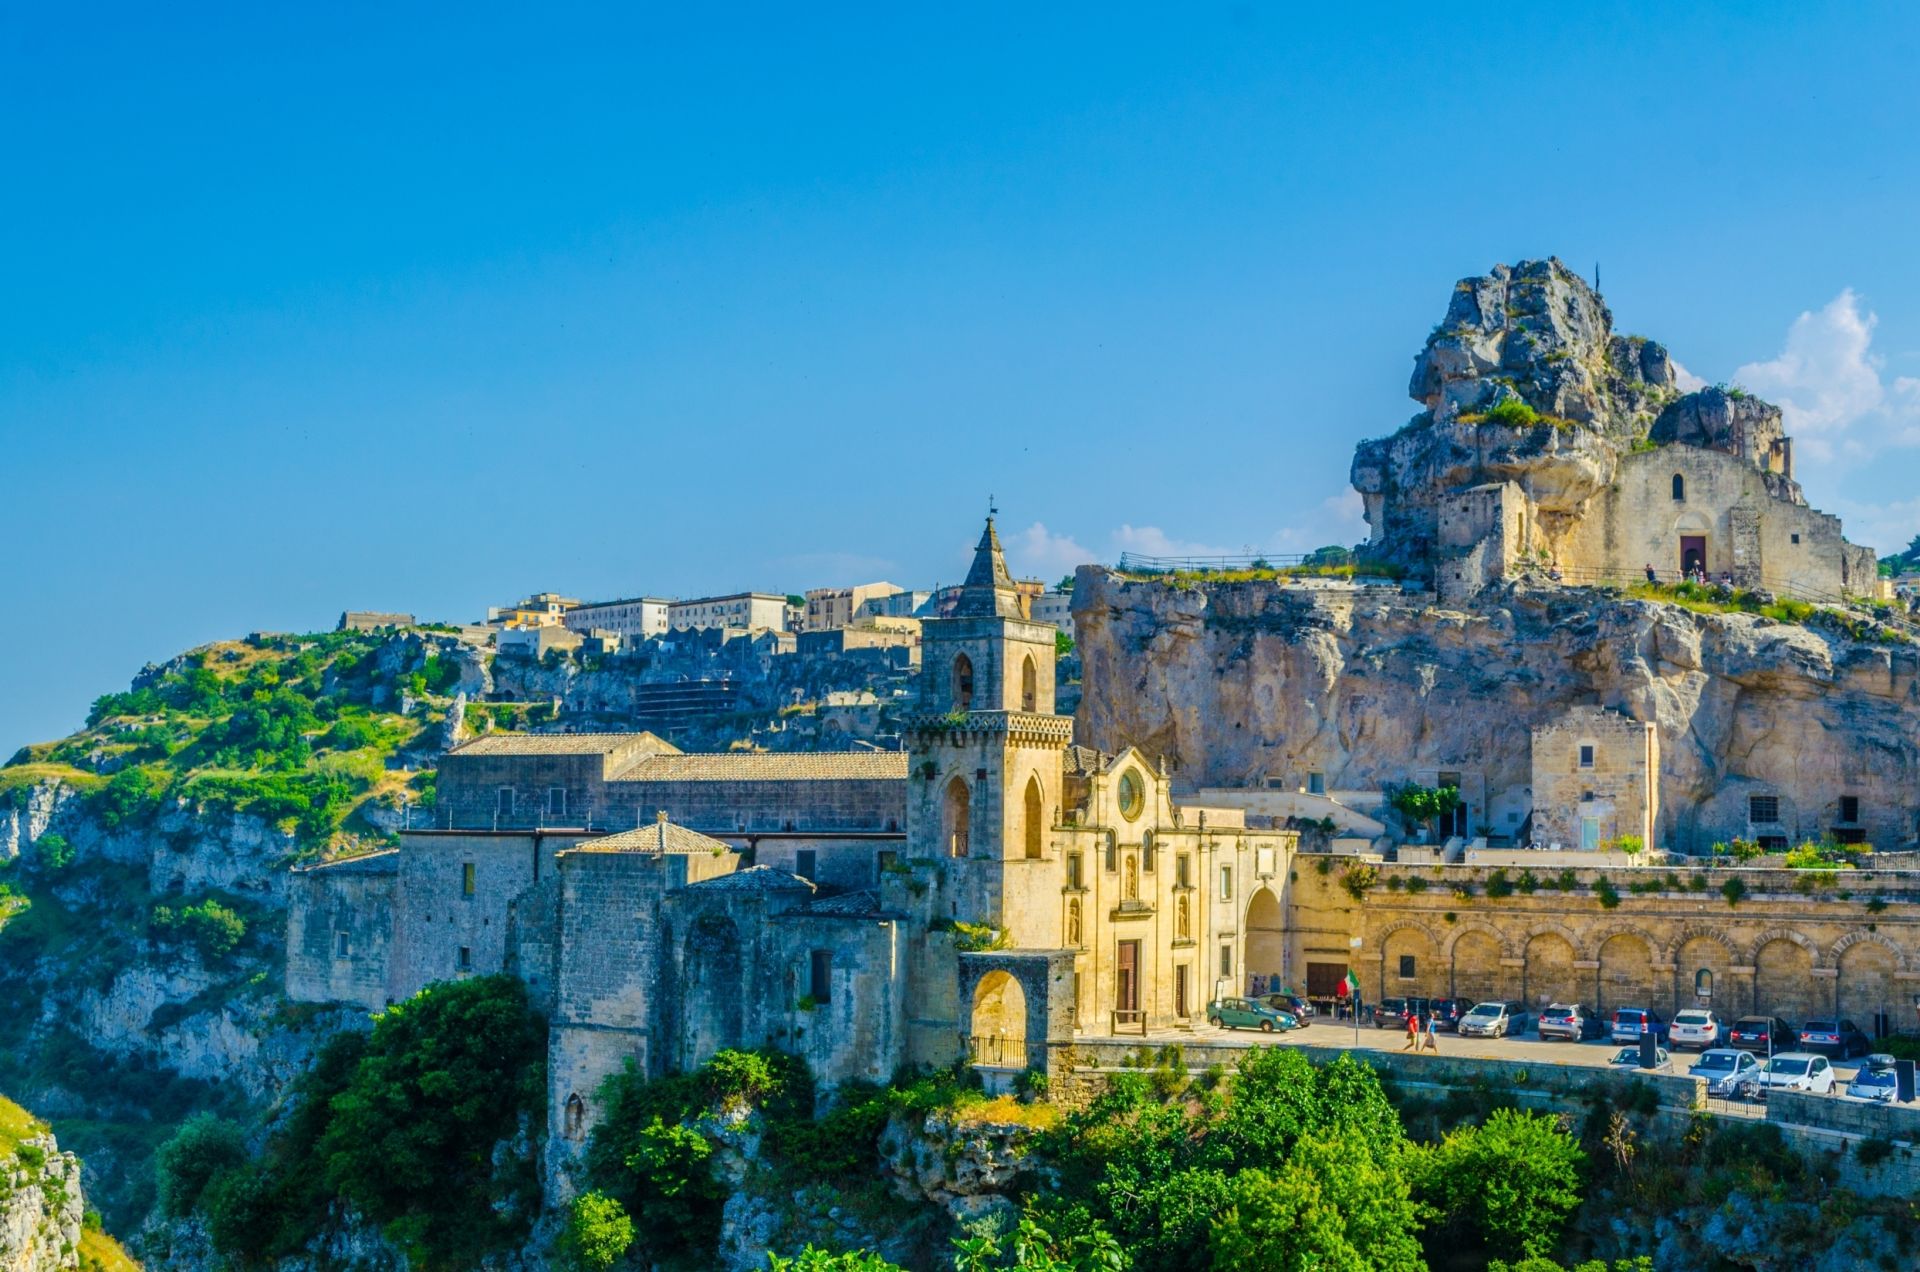 View-of-rooftops-of-the-Italian-city-Matera-with-san-pietro-caveoso-and-madonna-de-Idris-churches-Italy